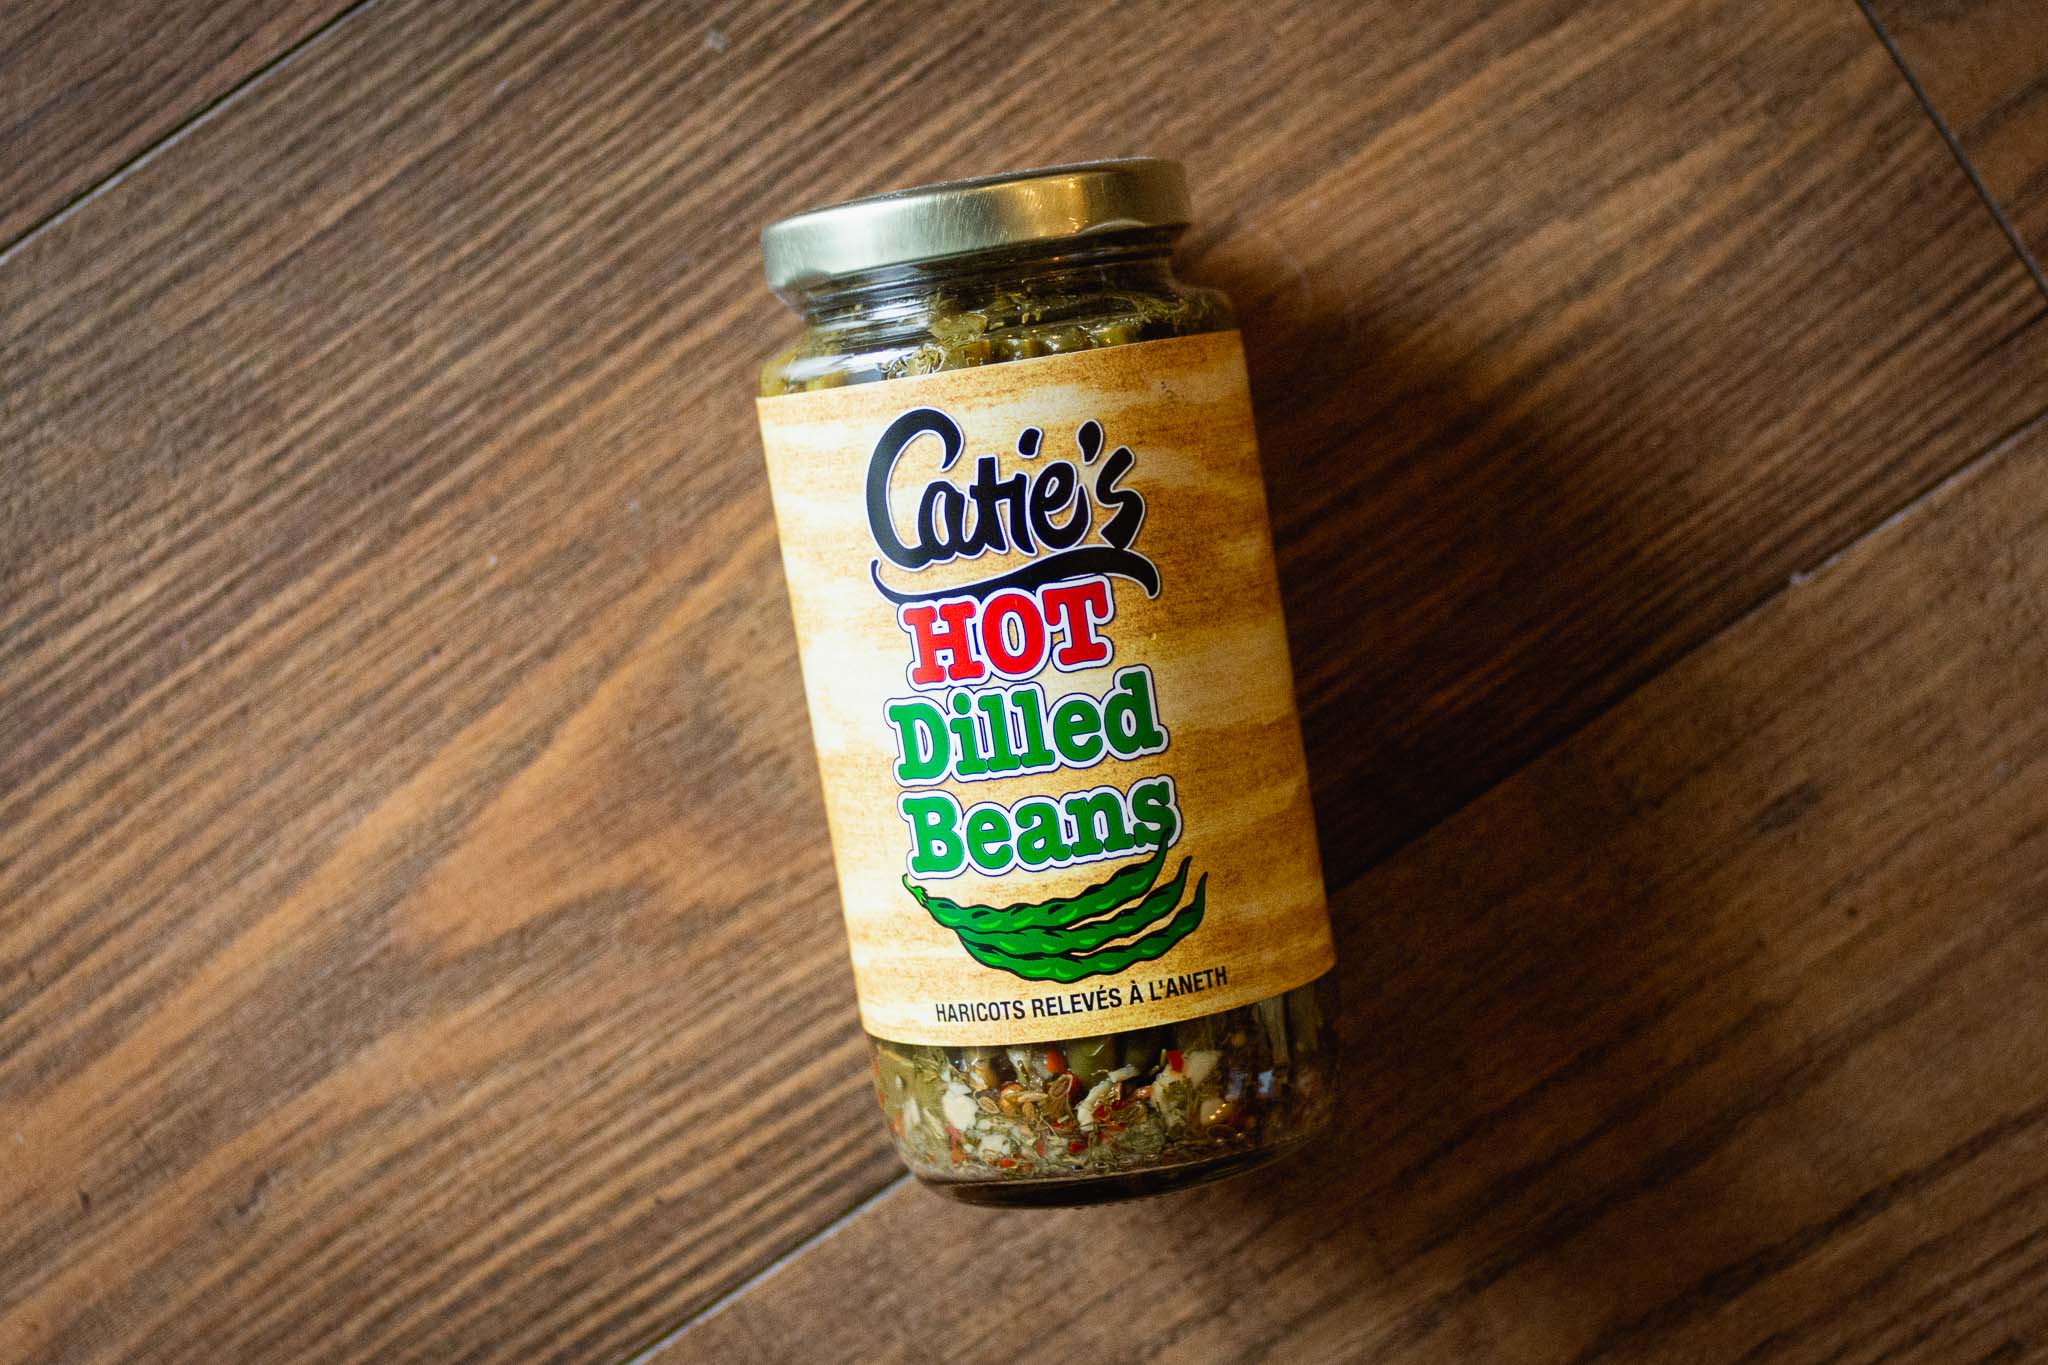 Hot Dilled Beans by Catie’s Preserves